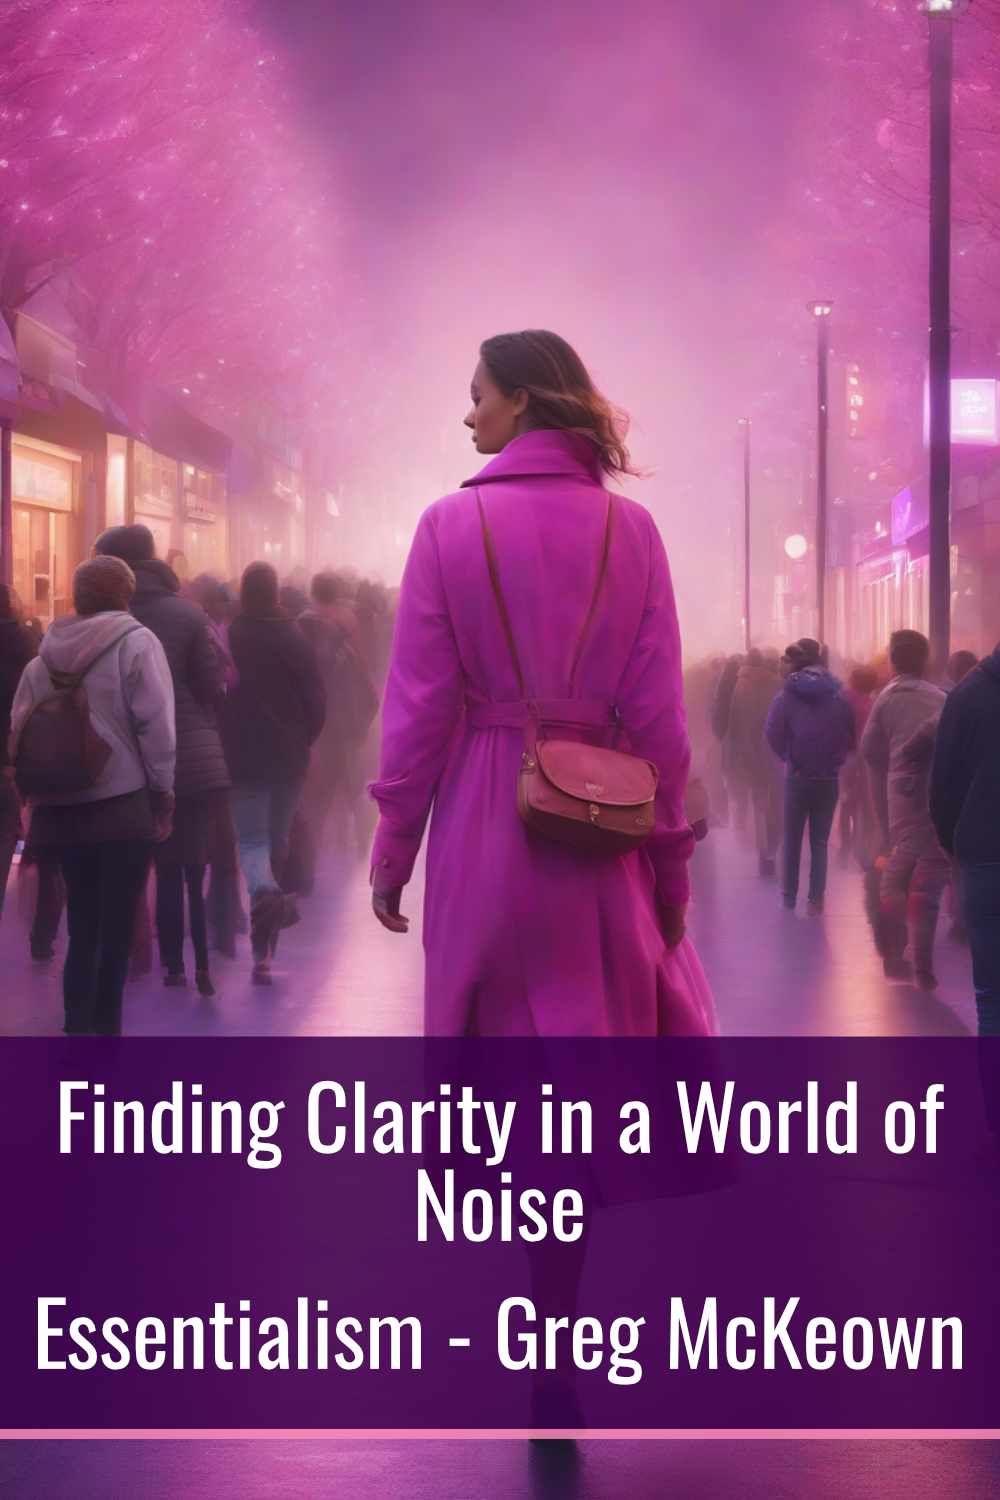 Finding essential clarity in a world of noise.